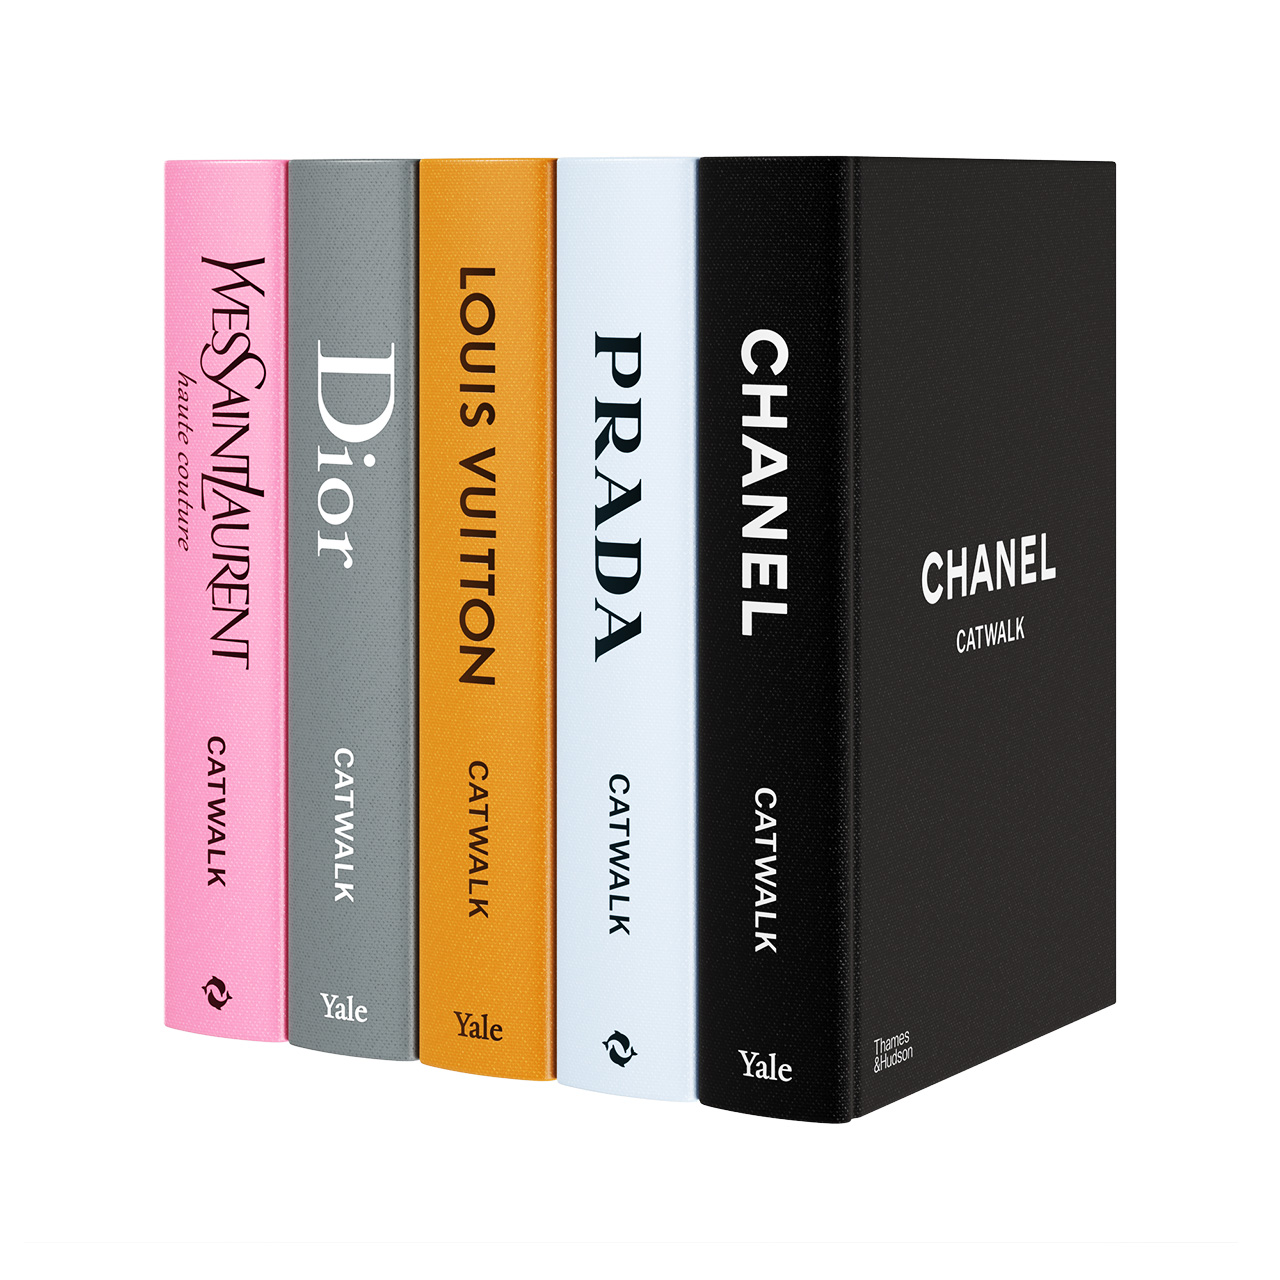 Catwalk Book Collection by Thames & Hudson